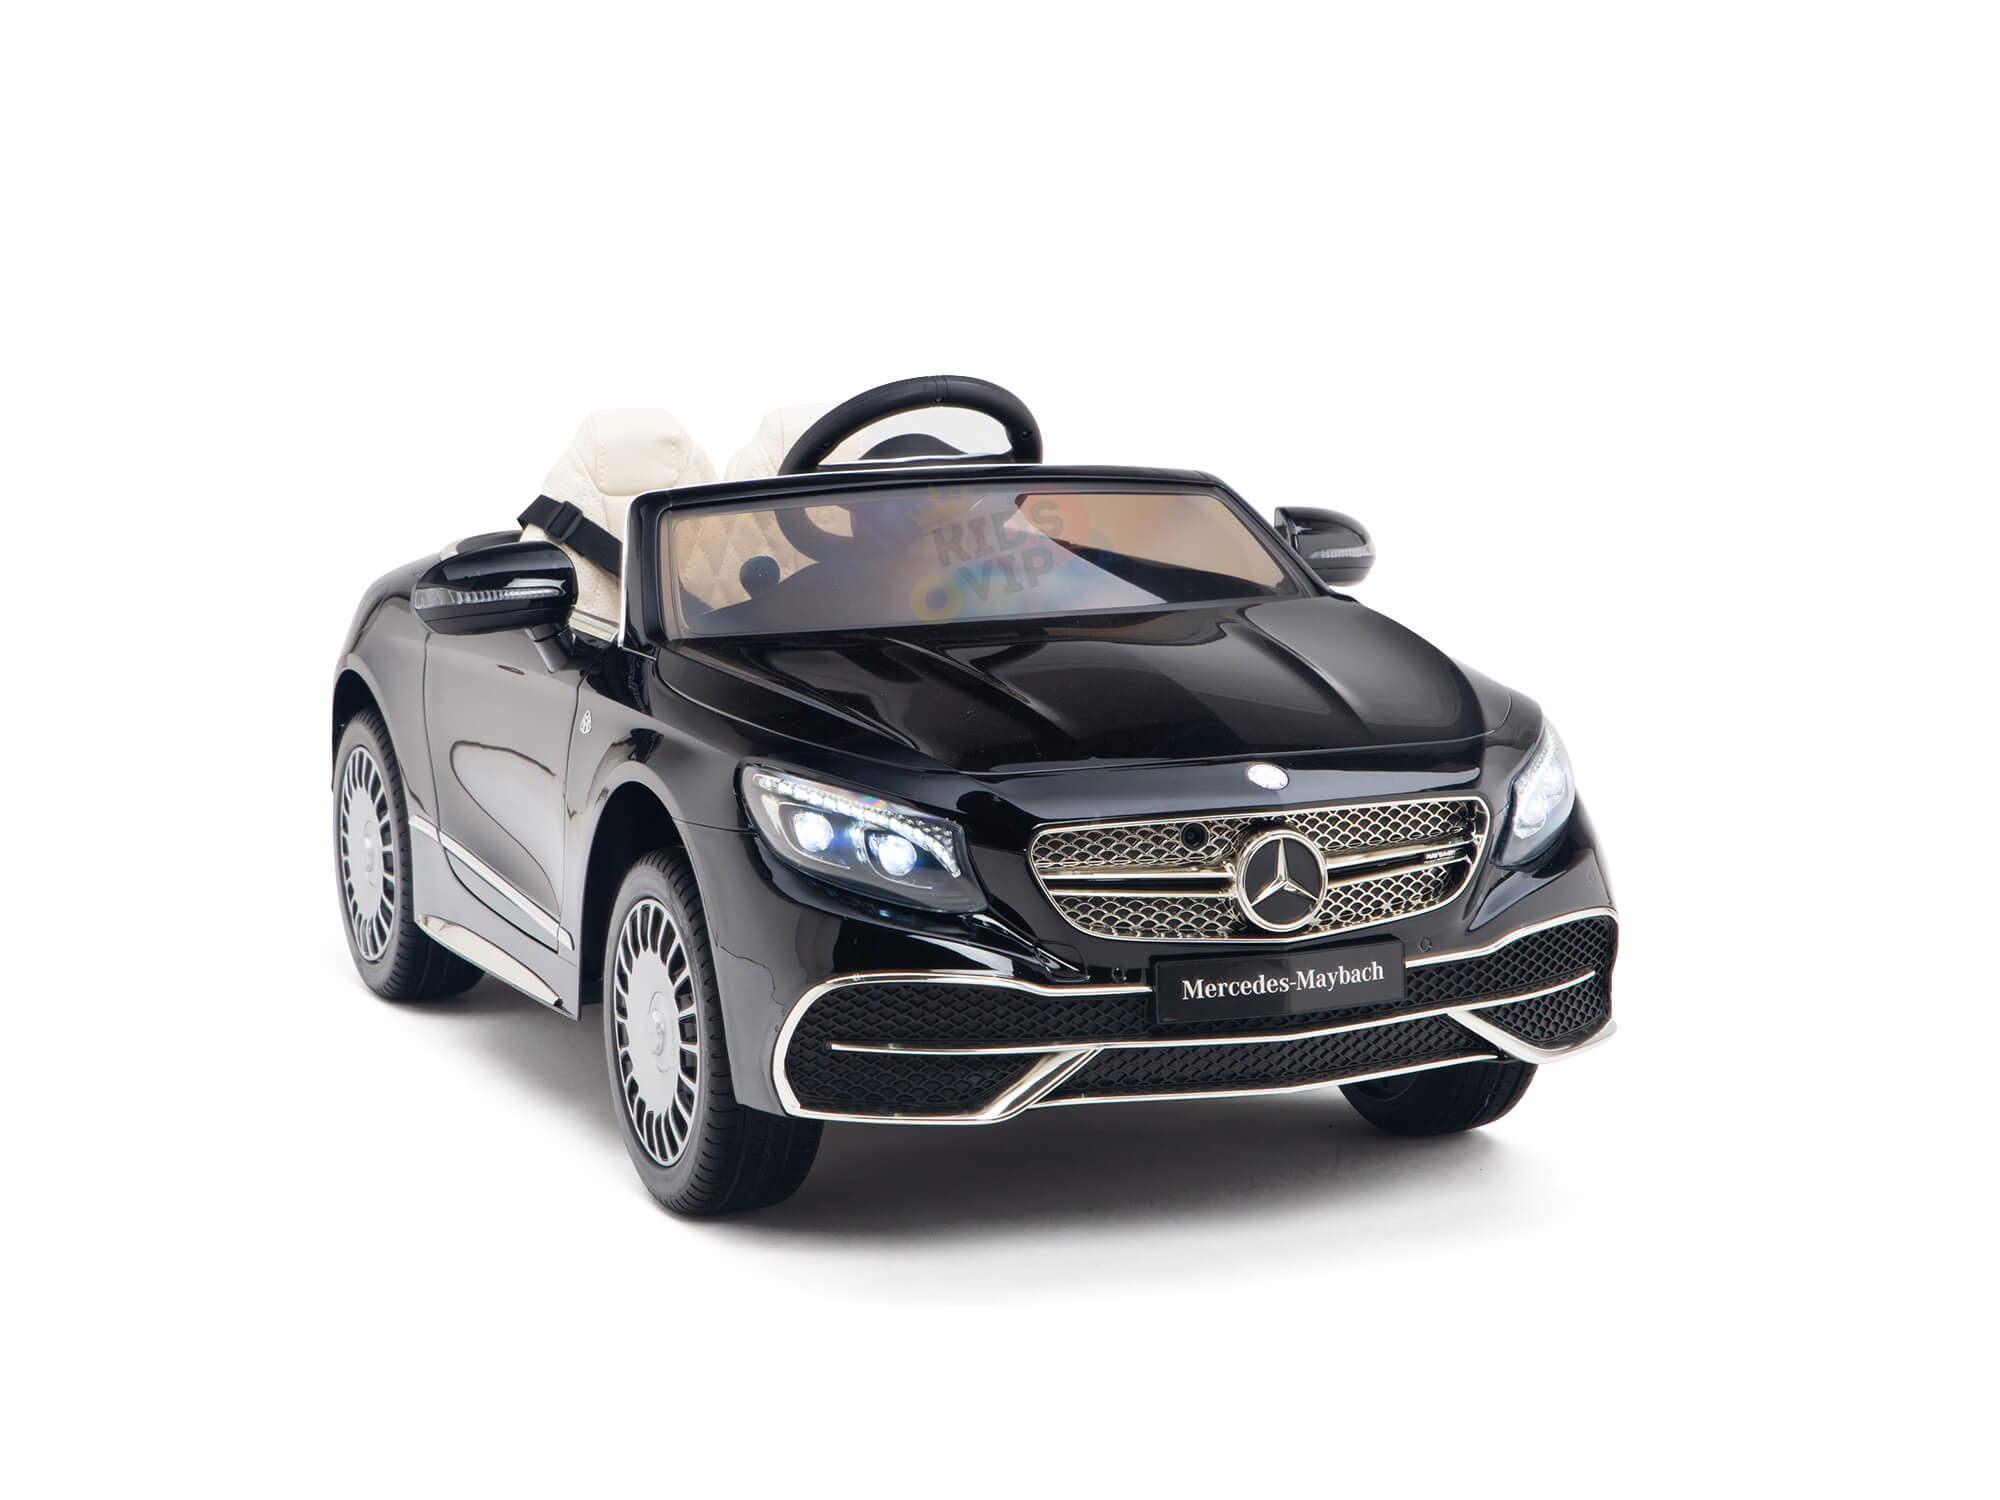 Kidsvip 12V Mercedes Maybach Kids Ride On Car Black 1 8 Browse By Price $250 – $399